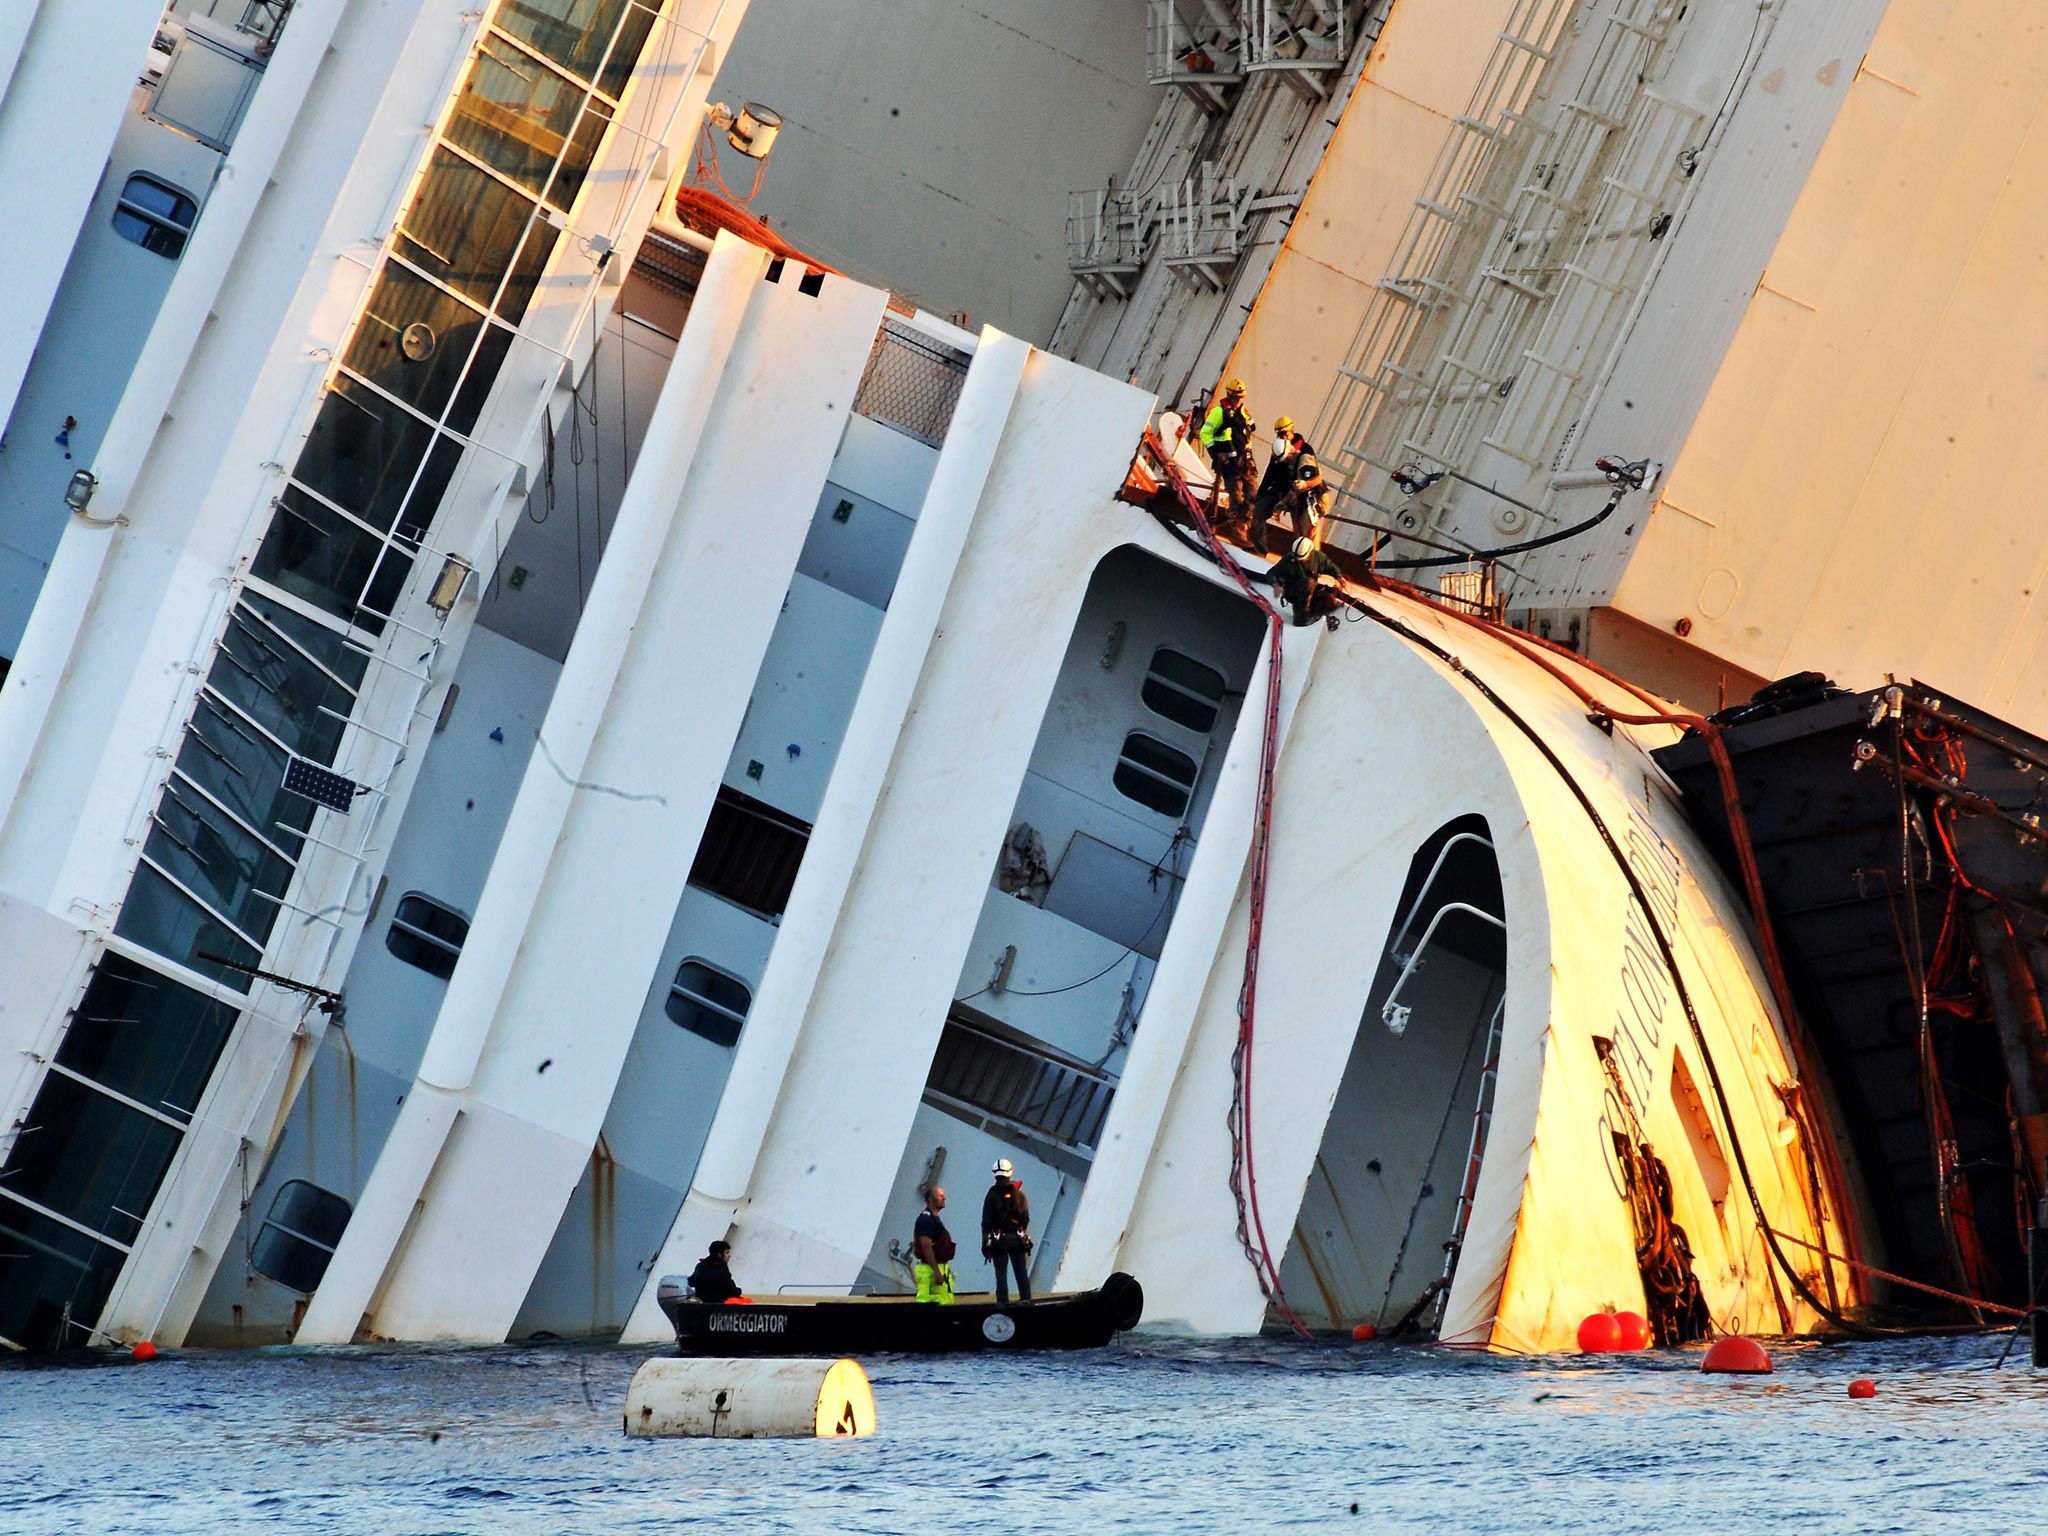 16 September 2013: Titan and Micoperi workers are seen on the stricken Costa Concordia in Isola del Giglio, Italy